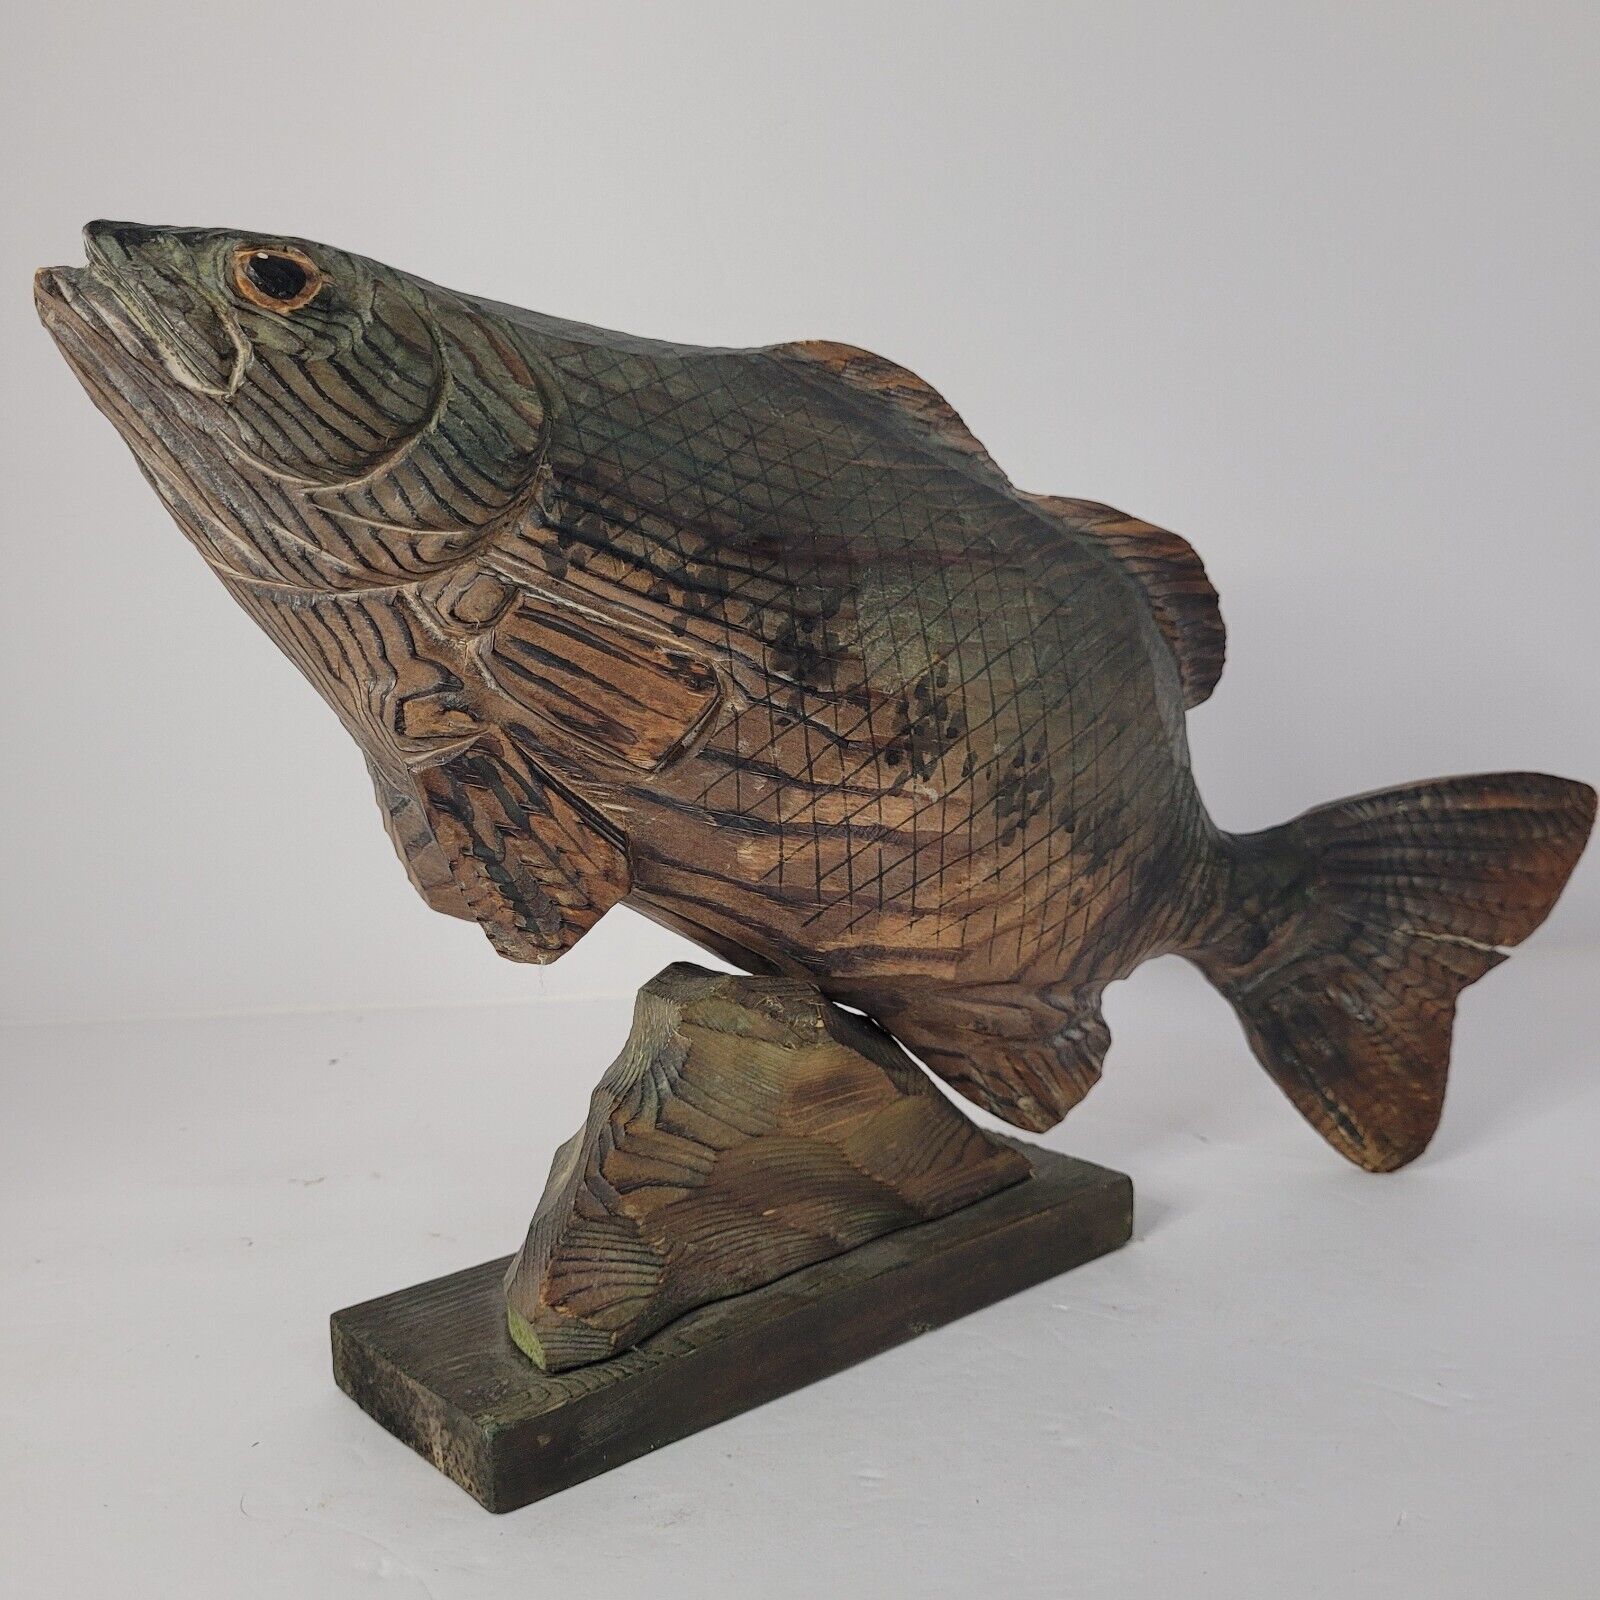 Artist Unsigned Aged Hand Carved Wood 14”  Fish  Bass On Pedestal Figurine